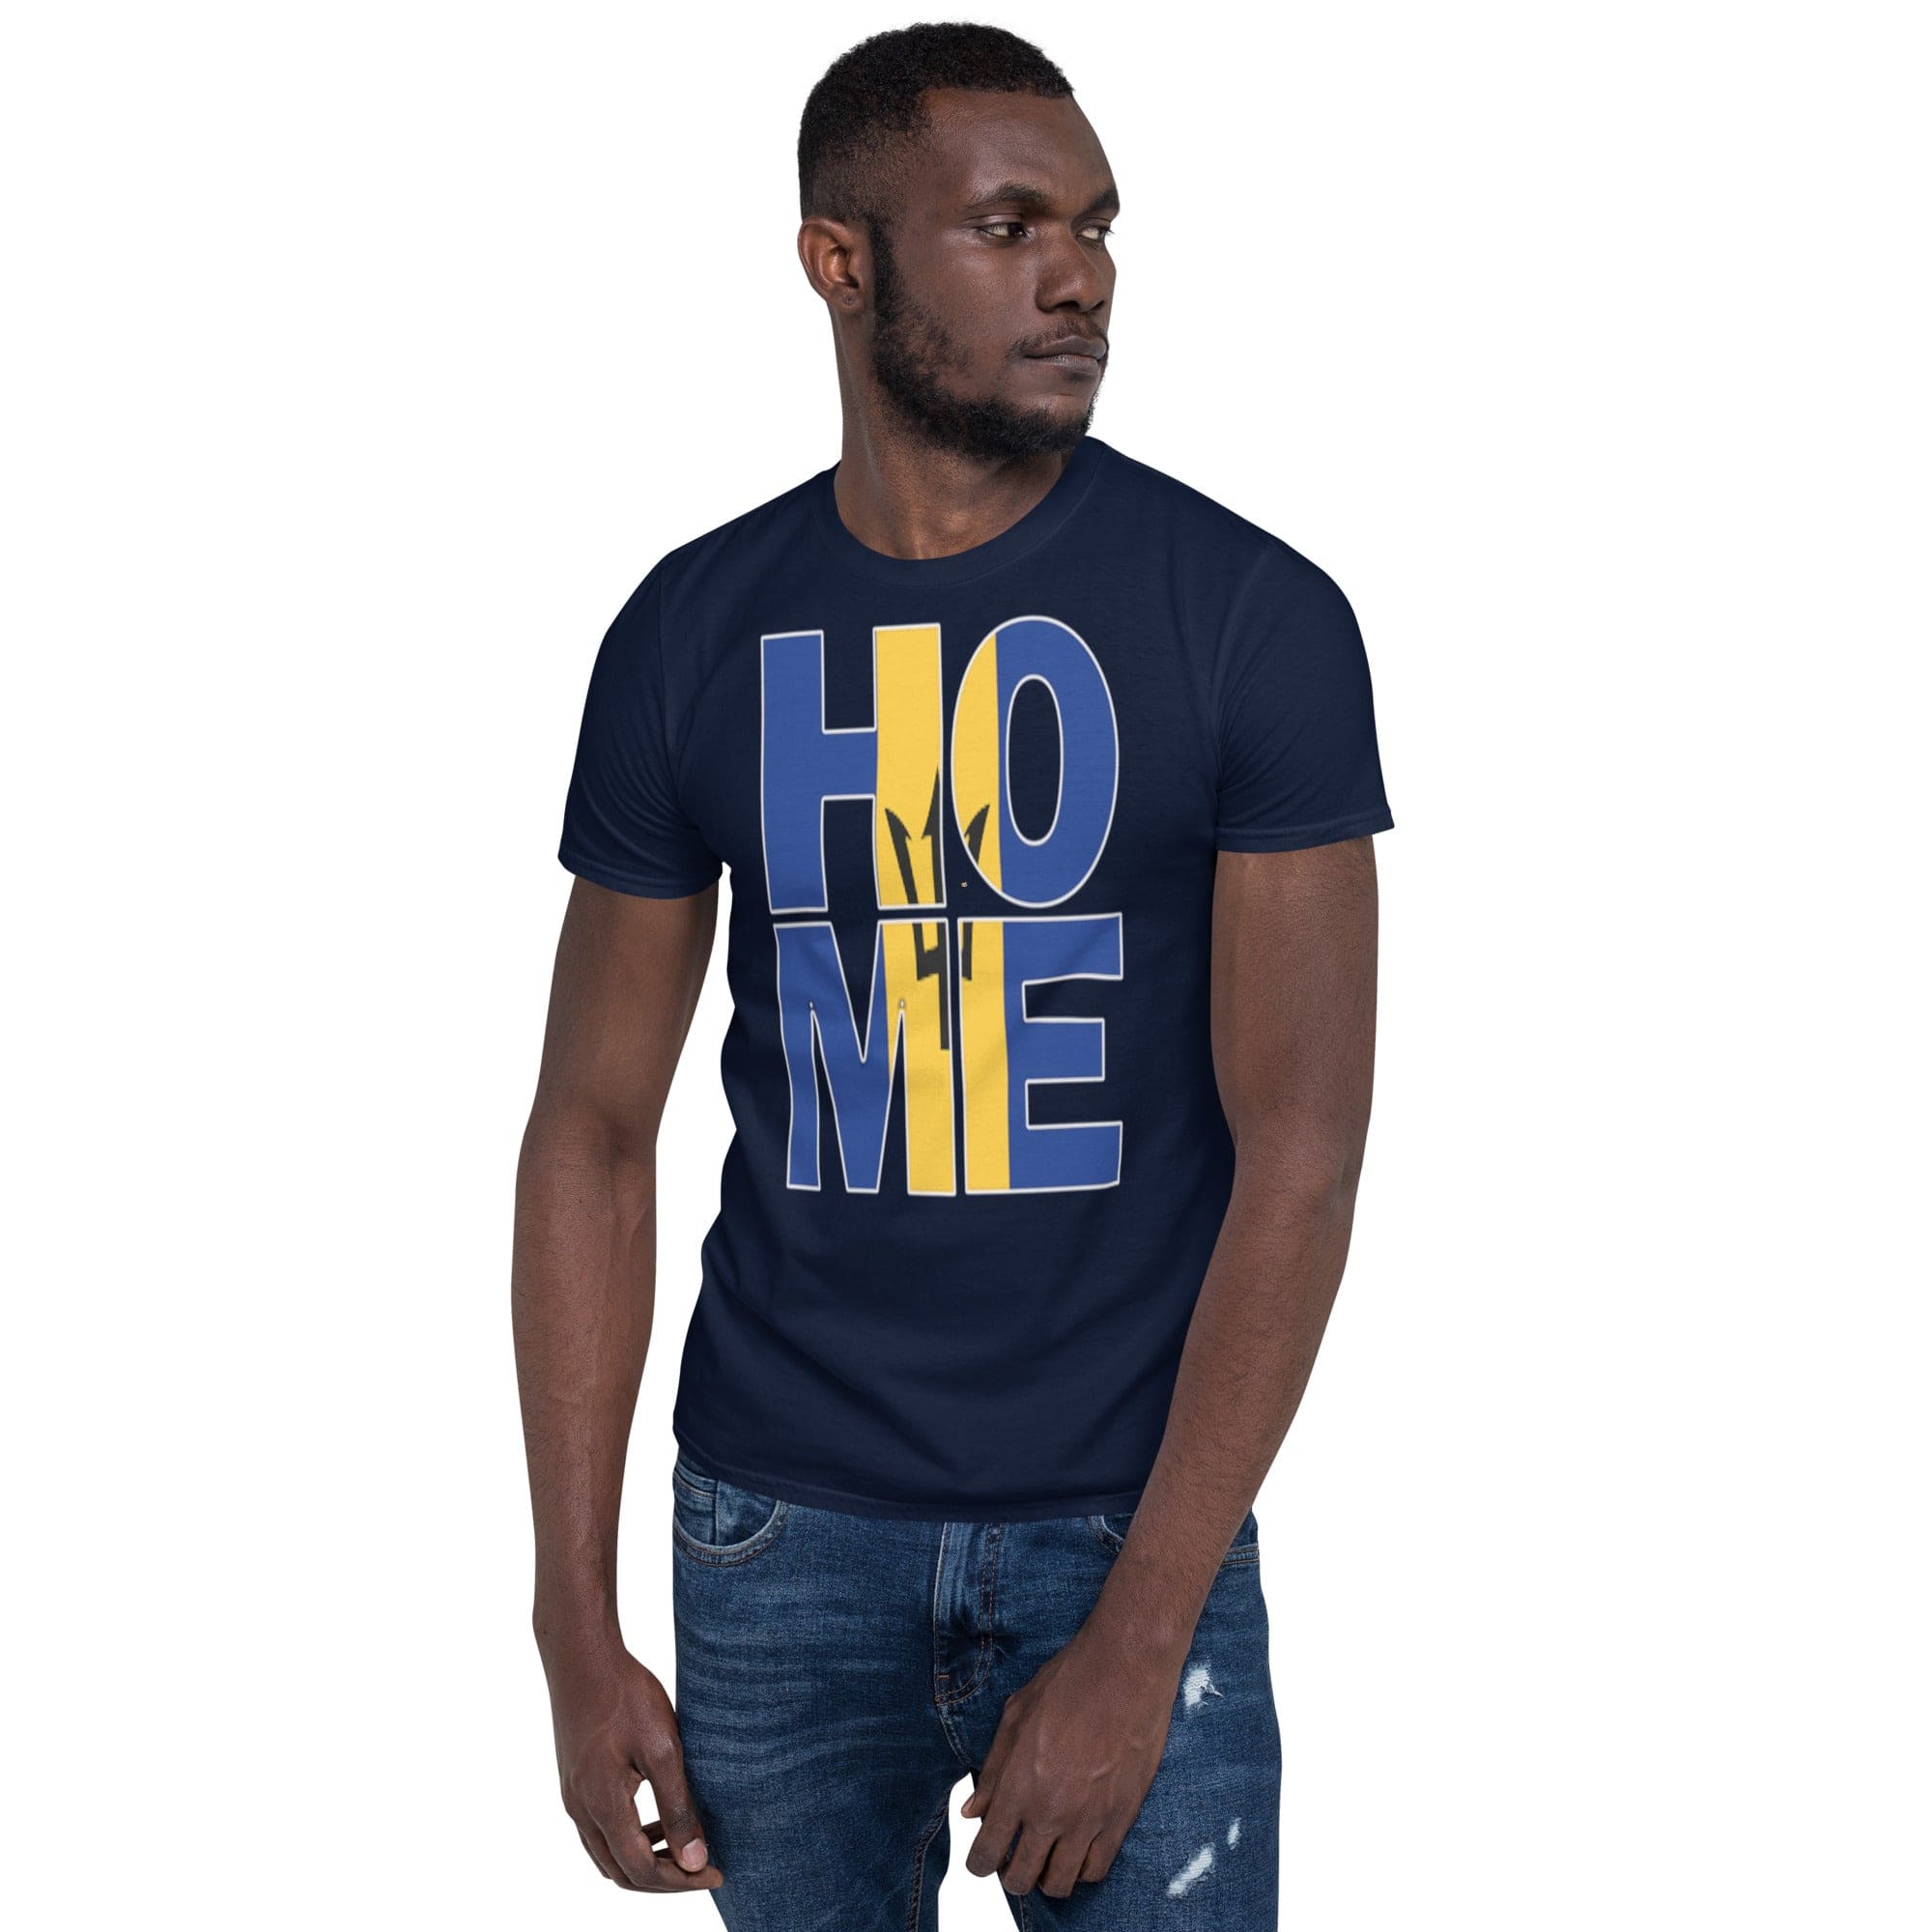 Barbados flag design in the words HOME on a navy color shirt on the front of a black man.